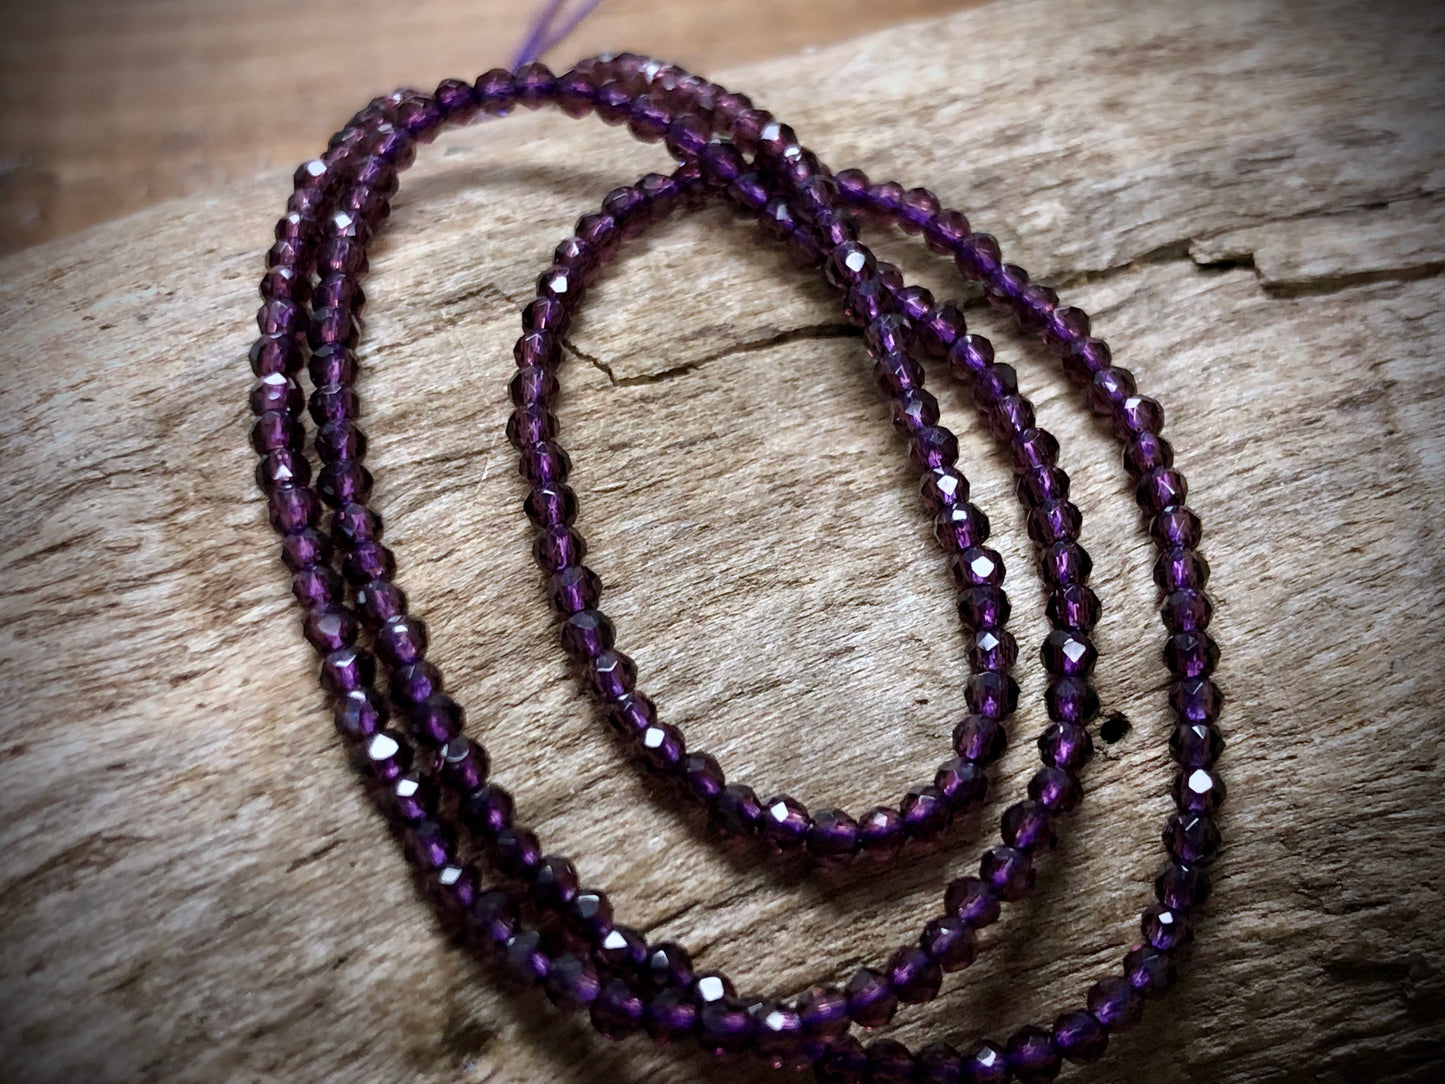 Thunder Polish Glass Faceted Rounds Strand - Violet - 2mm - 14”